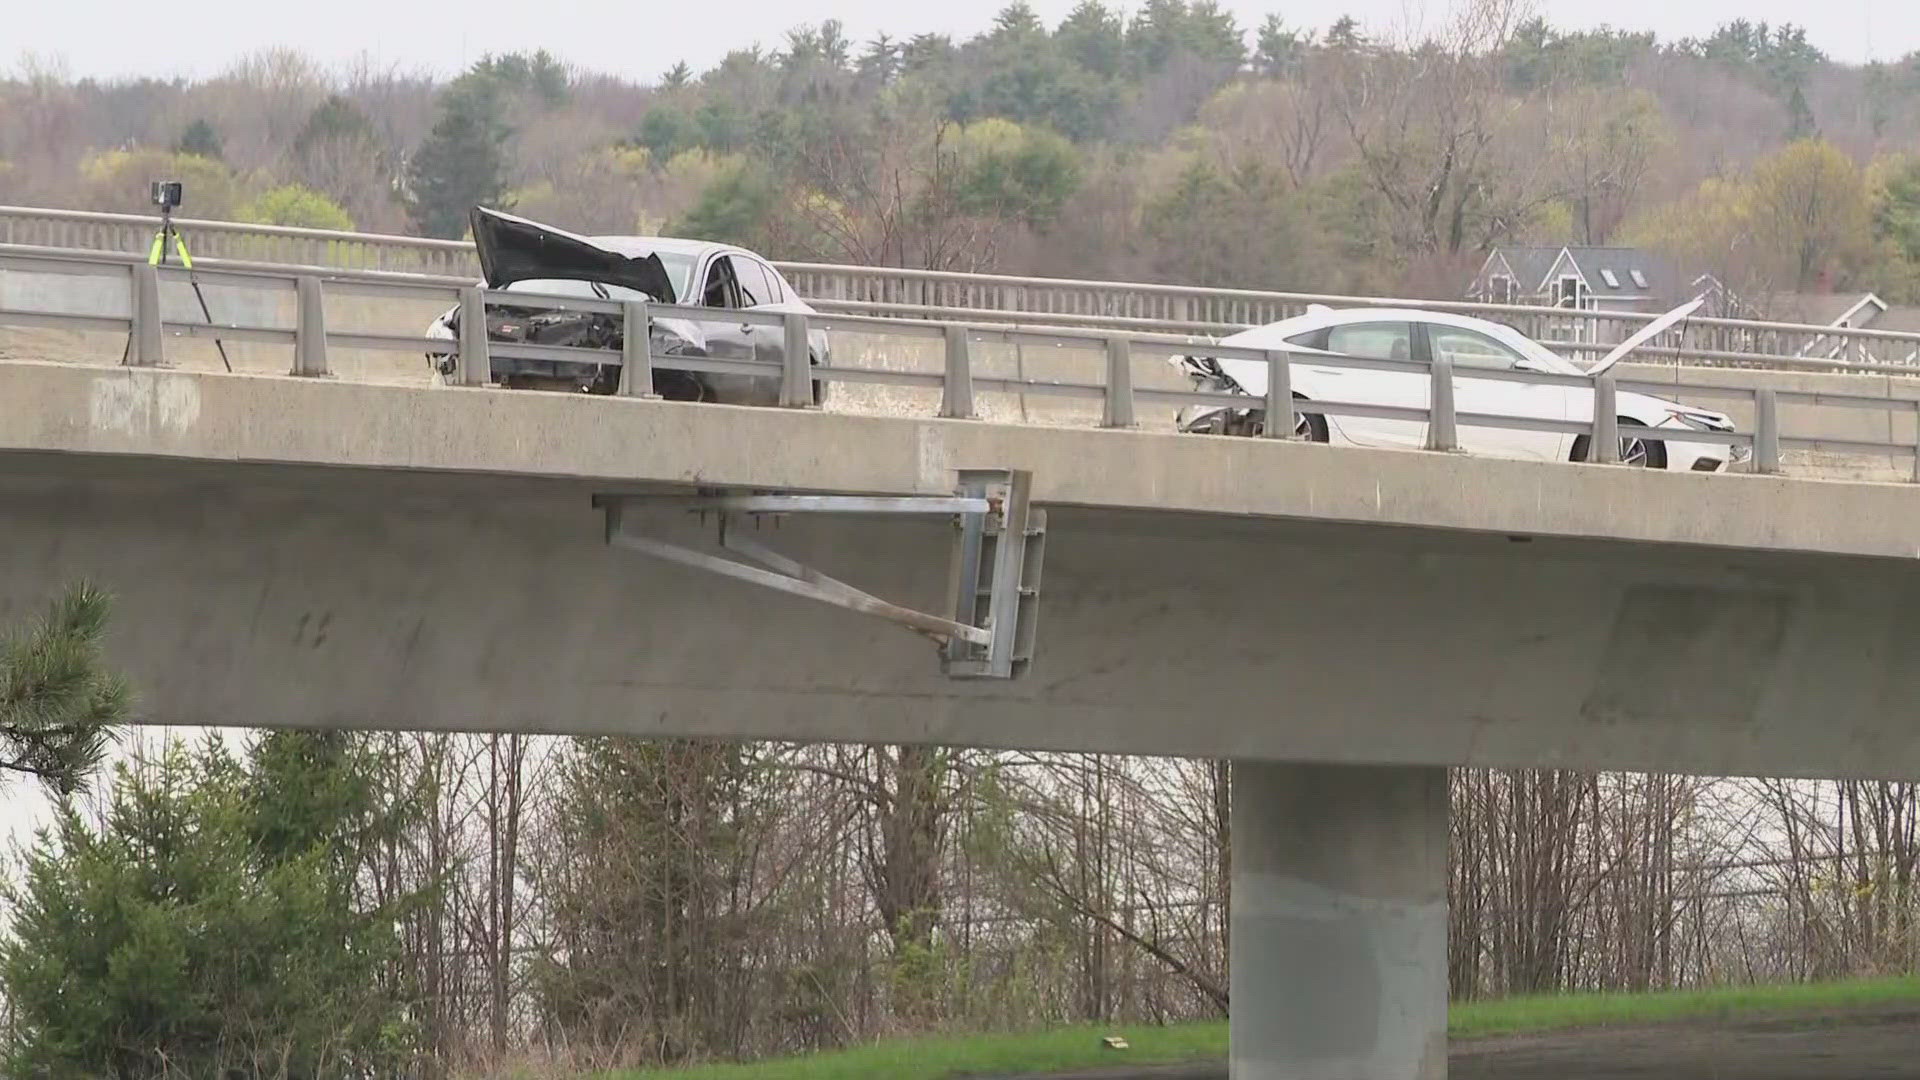 The crash, which closed the Exit 8 in Portland for several hours, is being investigated by Portland police.